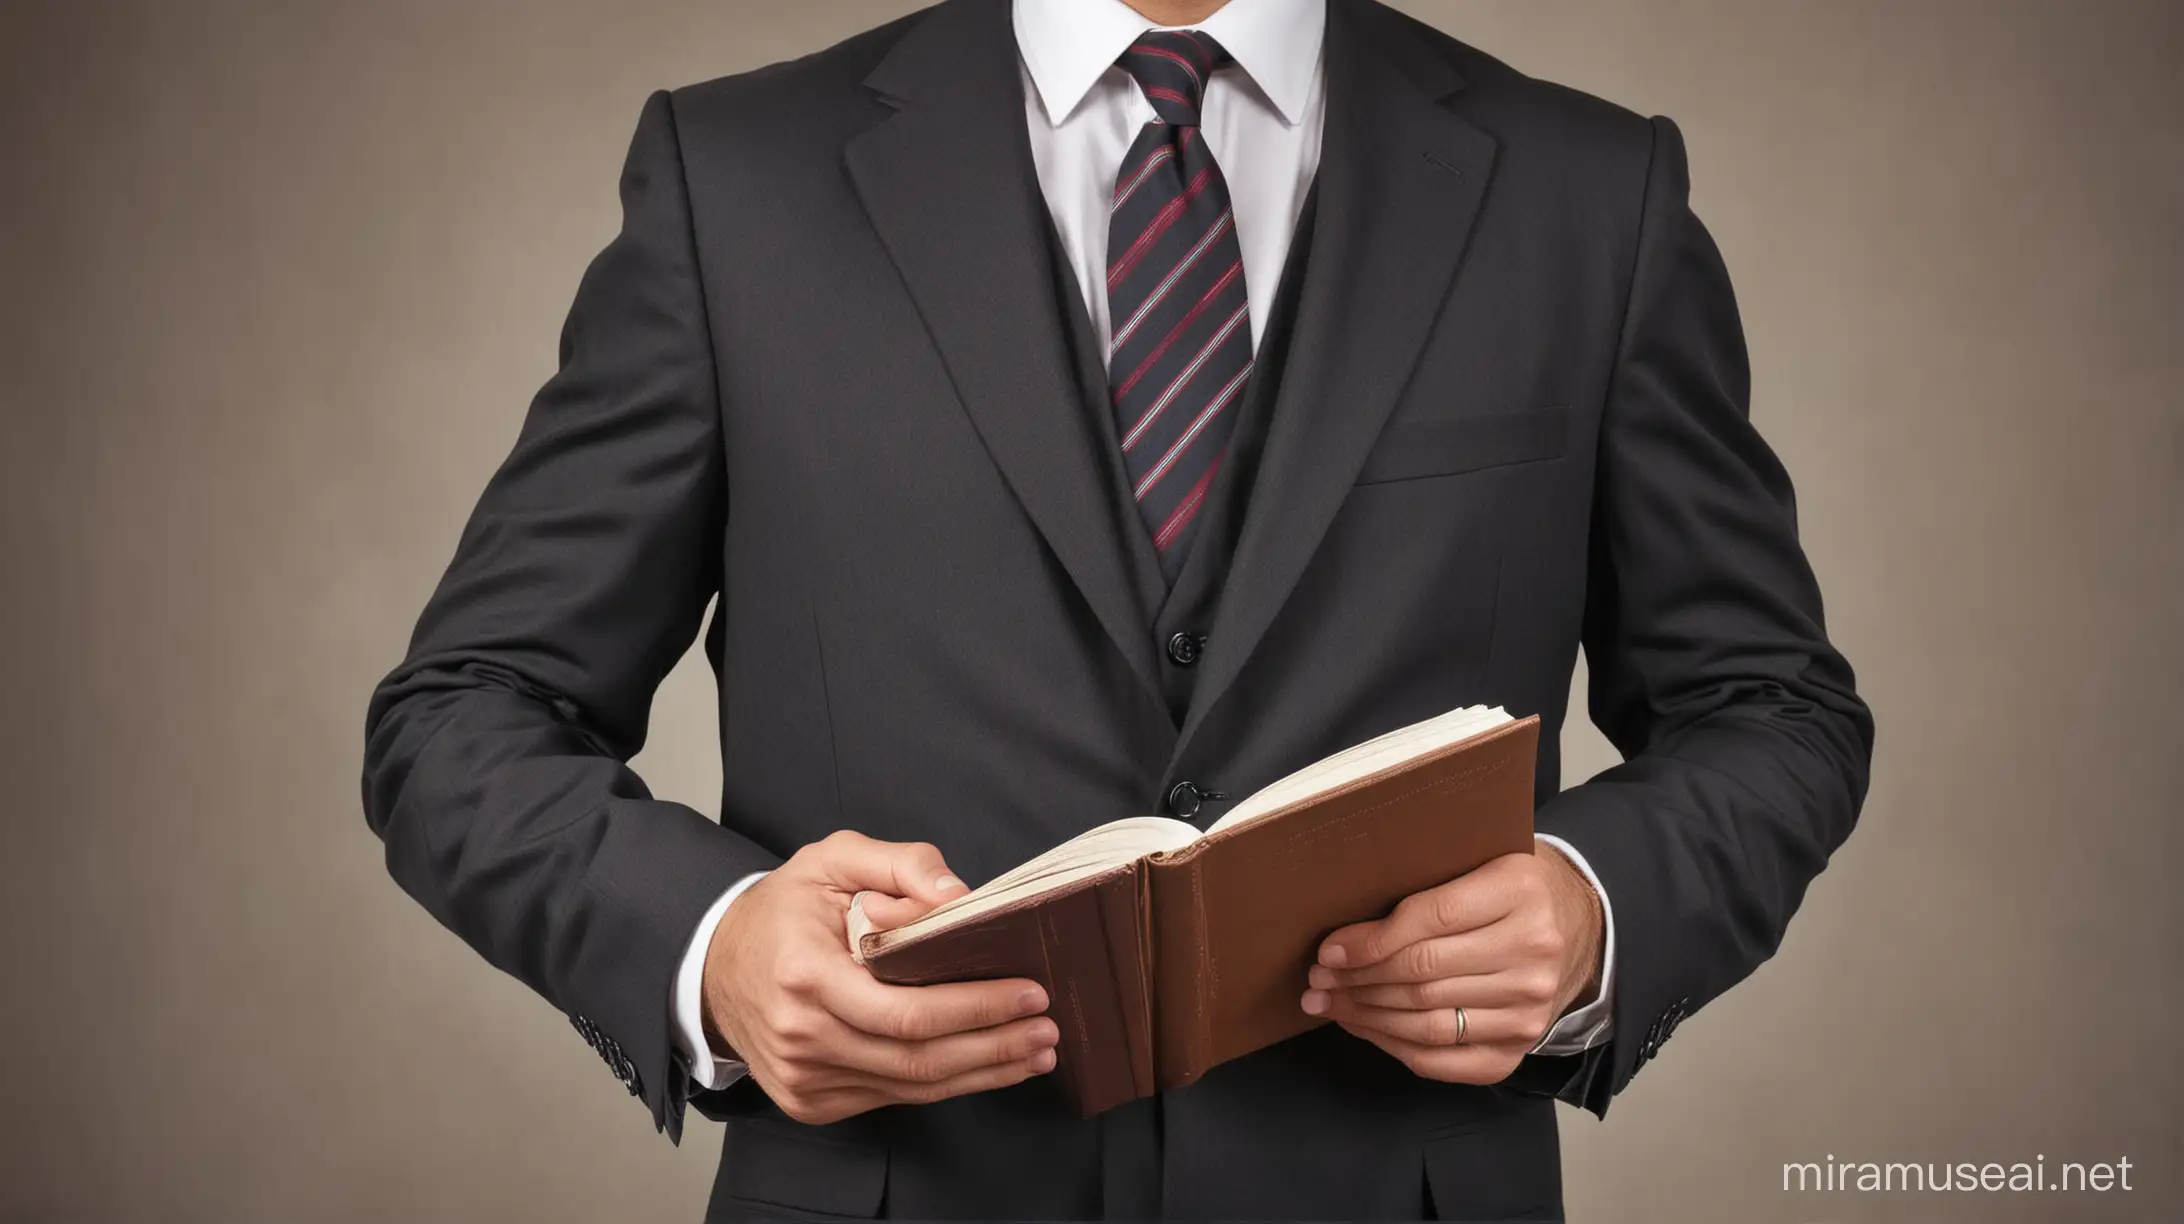 Businessman Reading Book Professional in Suit and Tie Engaged in Reading Activity